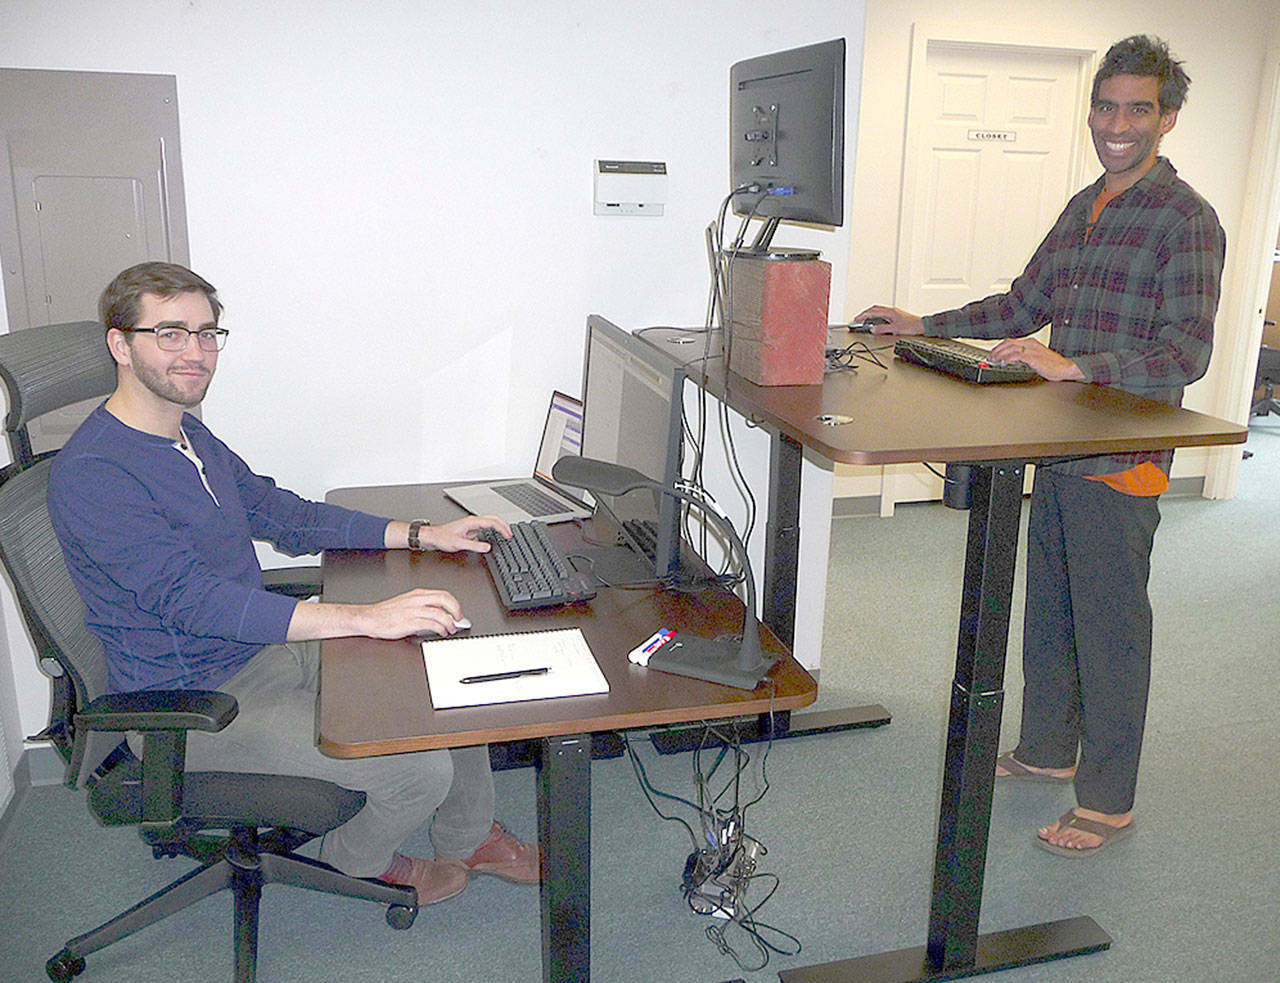 Patricia Morrison Coate/Olympic Peninsula News Group                                Edward Unthank, left, and Ankur Shah, right, display two different work station configurations at Clallam Coworking in Sequim.